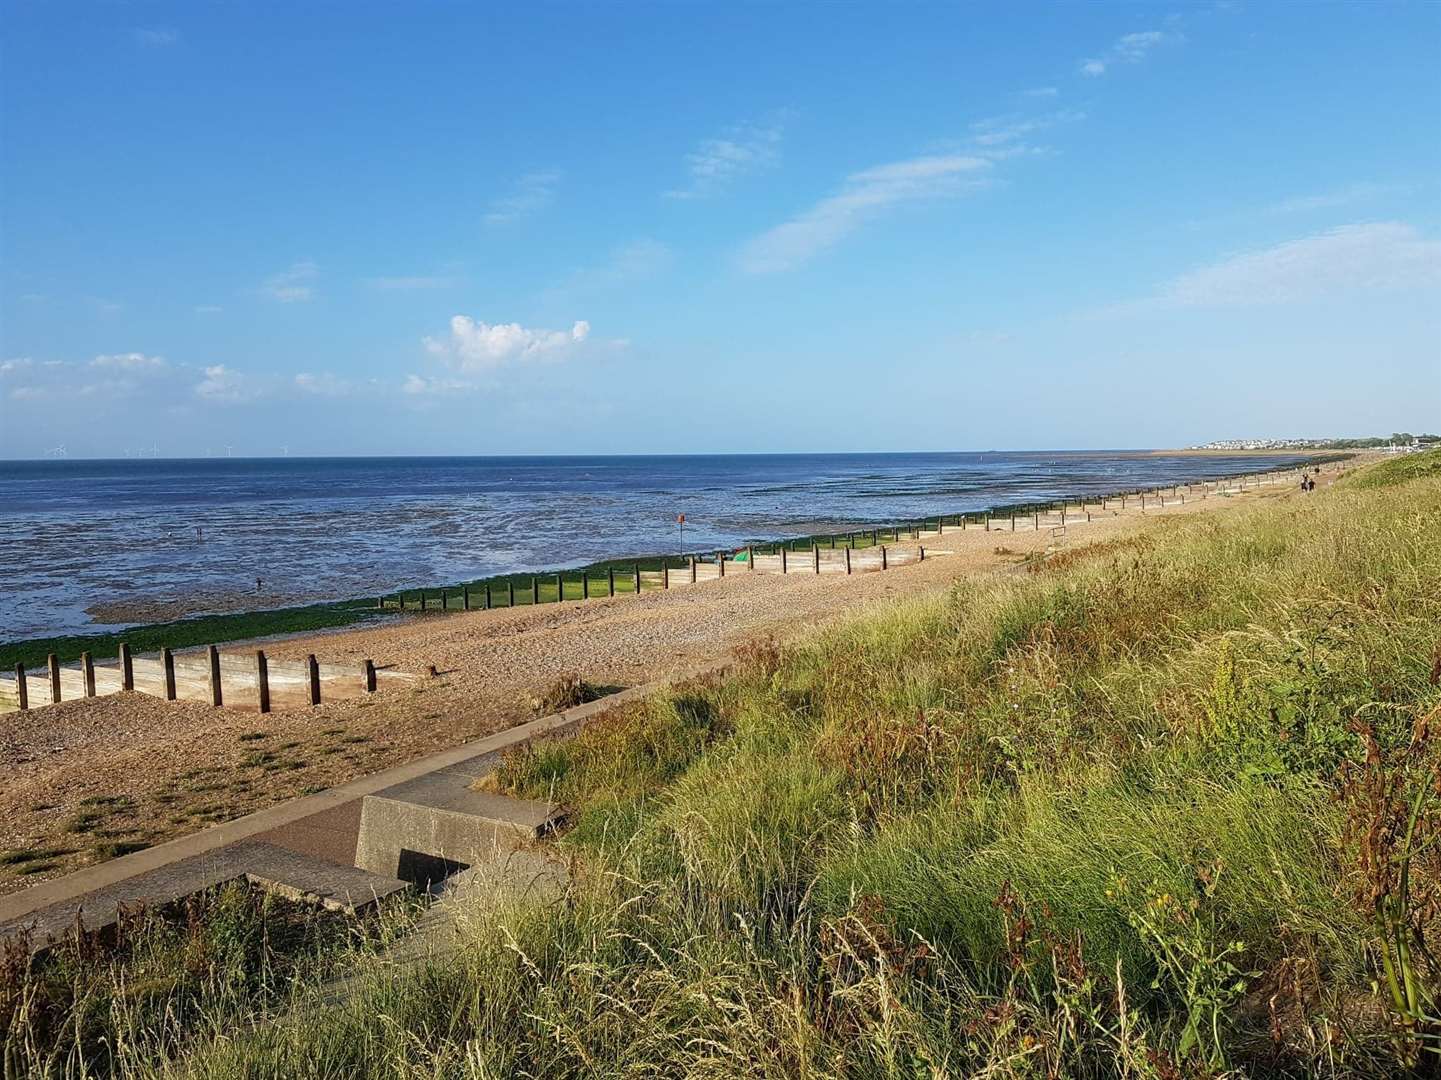 People are being advised not to enter the water at Tankerton